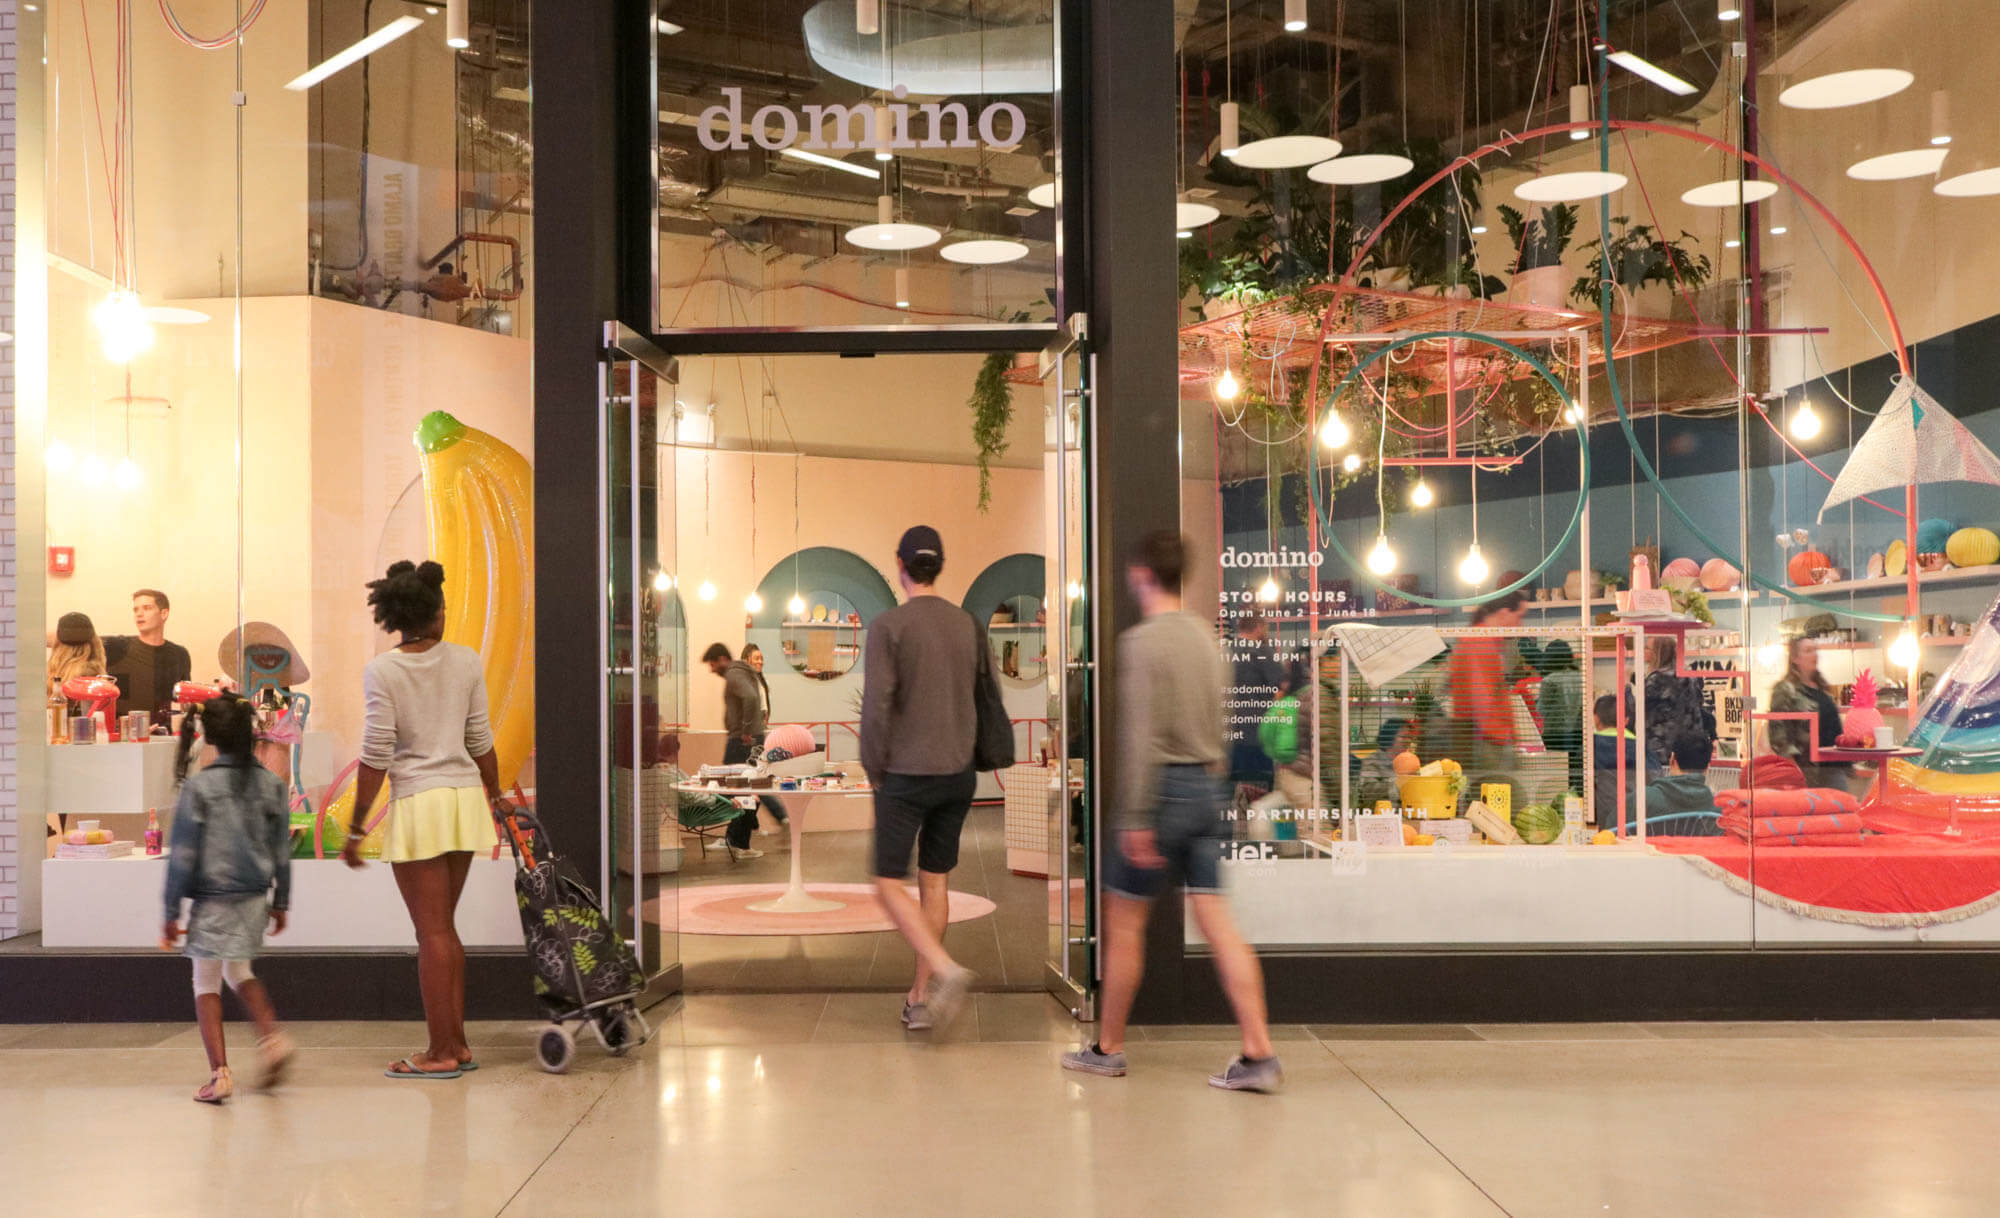 Brooklyn Design: Domino Summer Pop-Up Opens at City Point